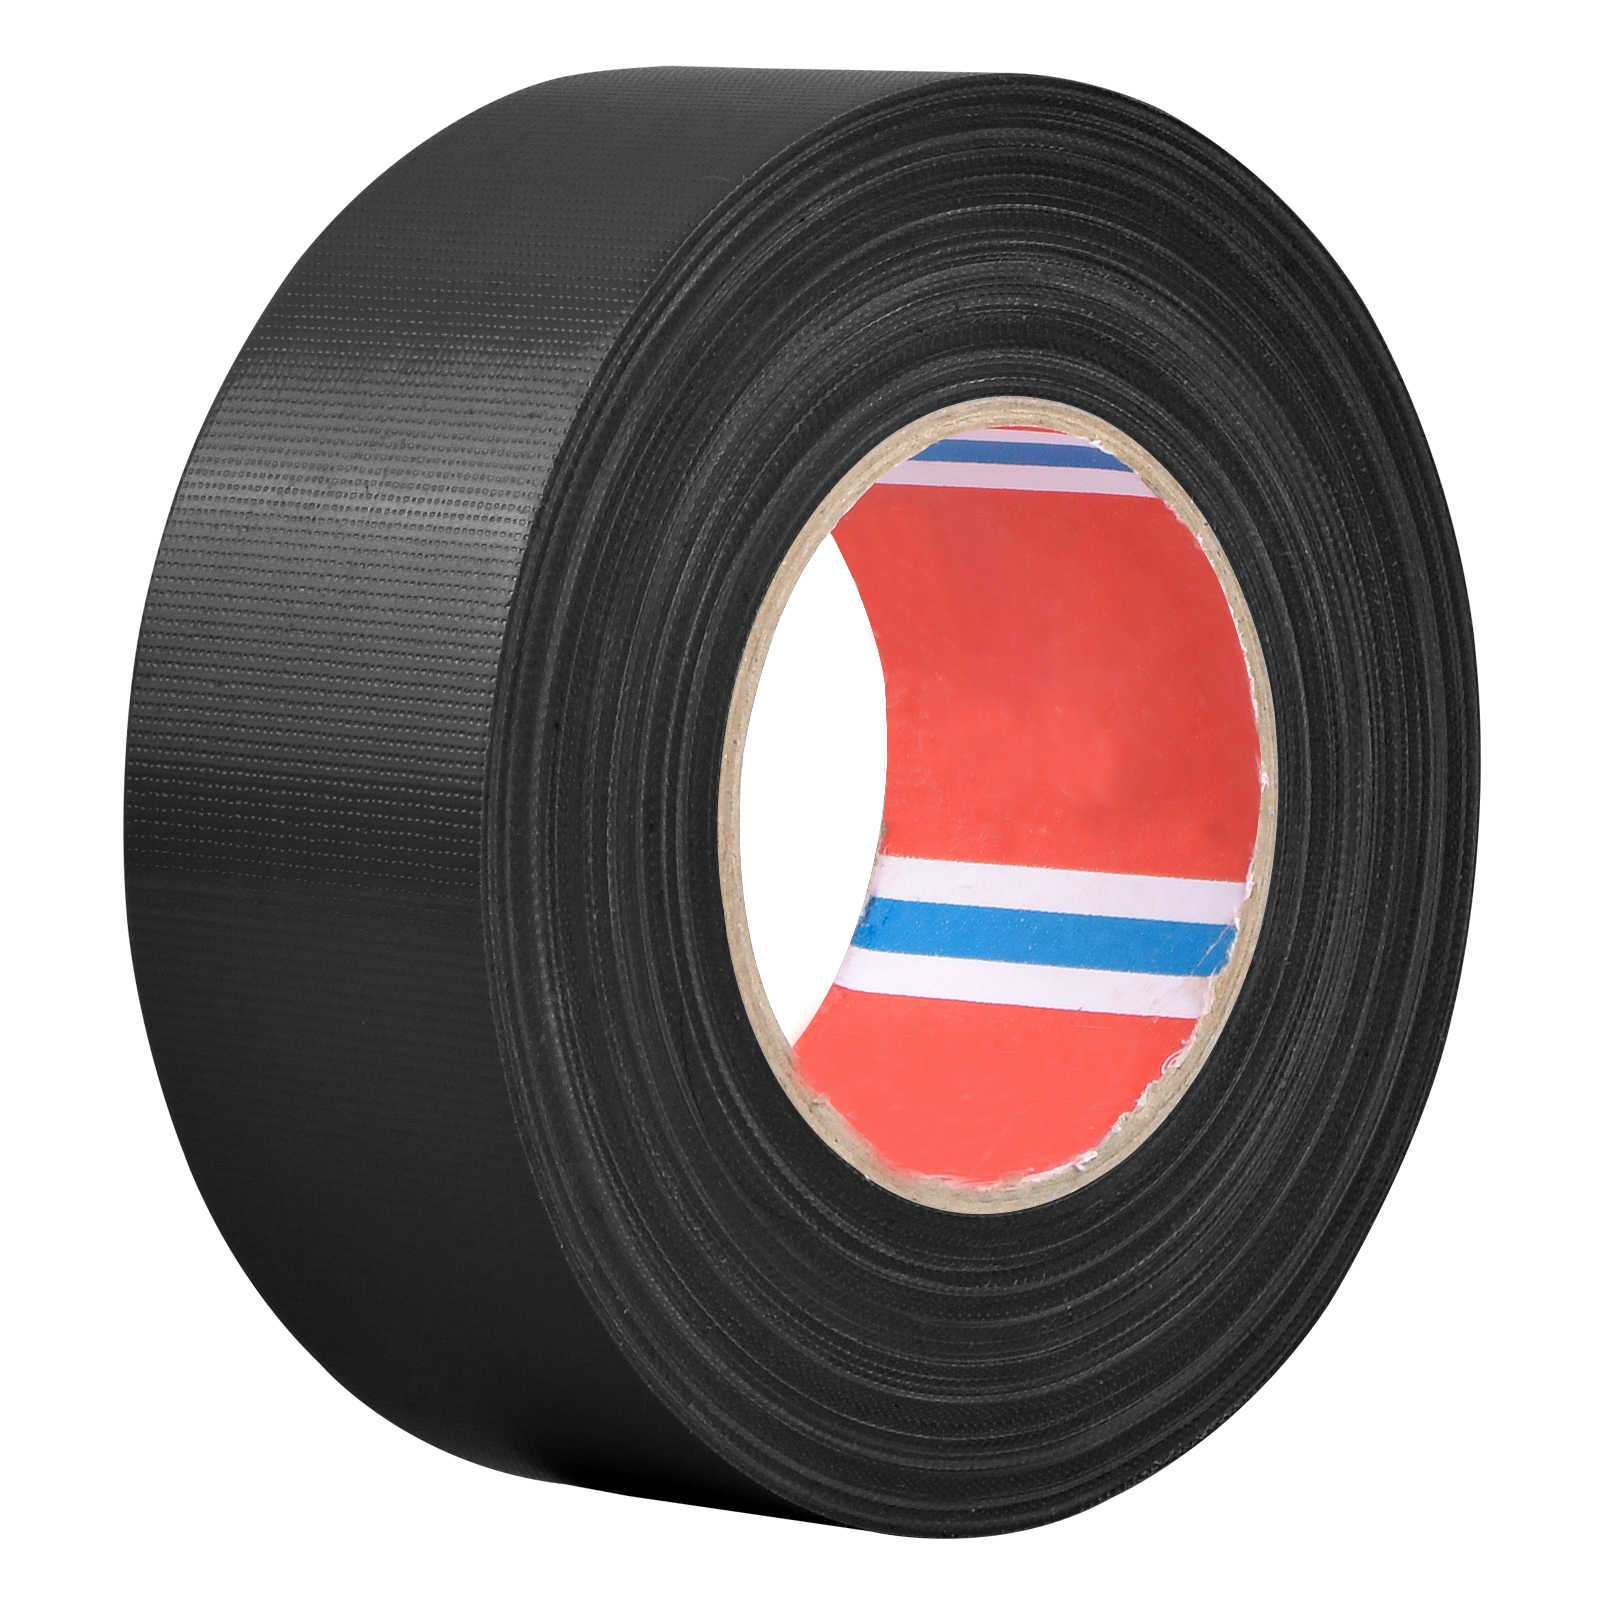 Cloth Tape, Duct Tape, Gaffer Tape